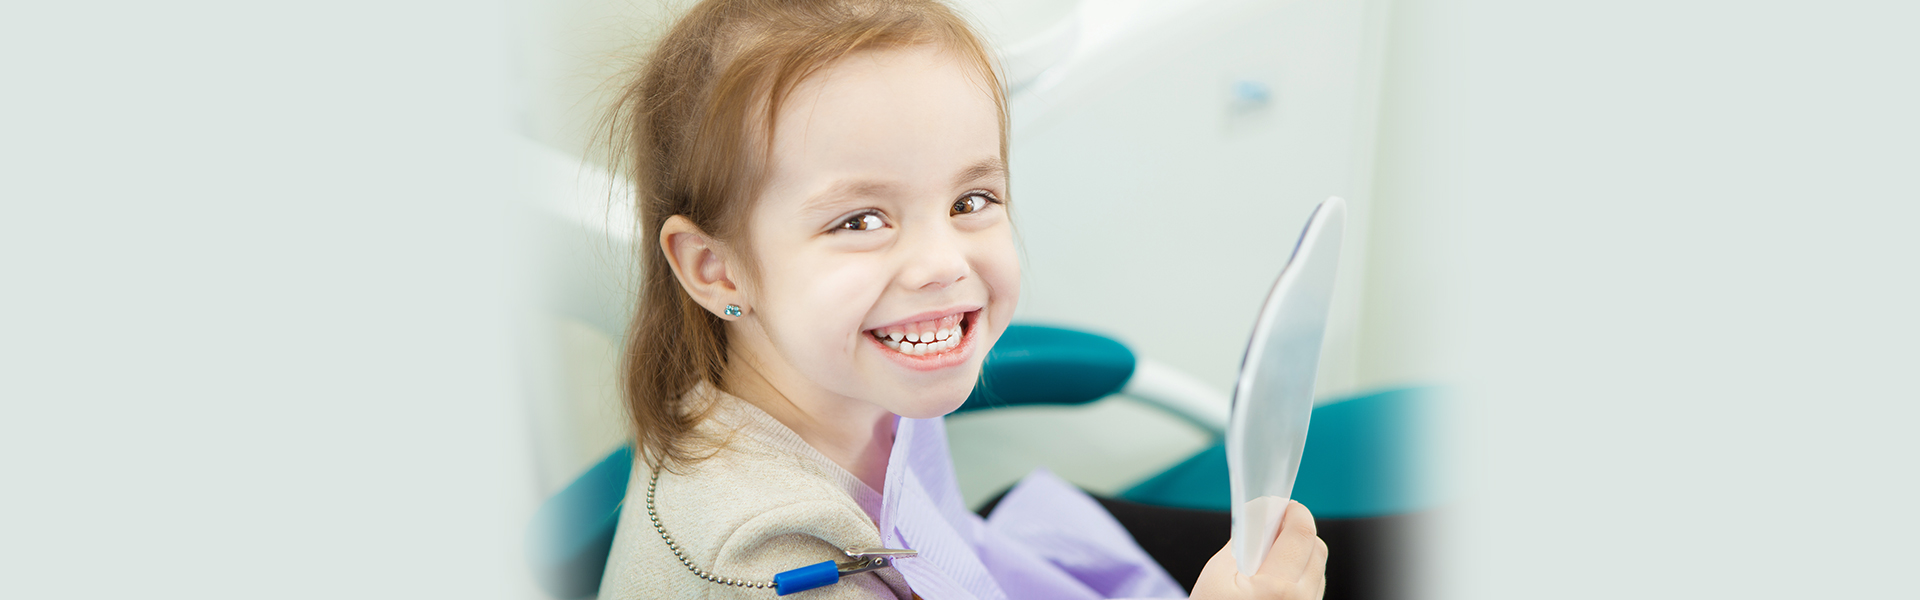 All About Pediatric Dentistry: What Is Pediatric Dentistry?